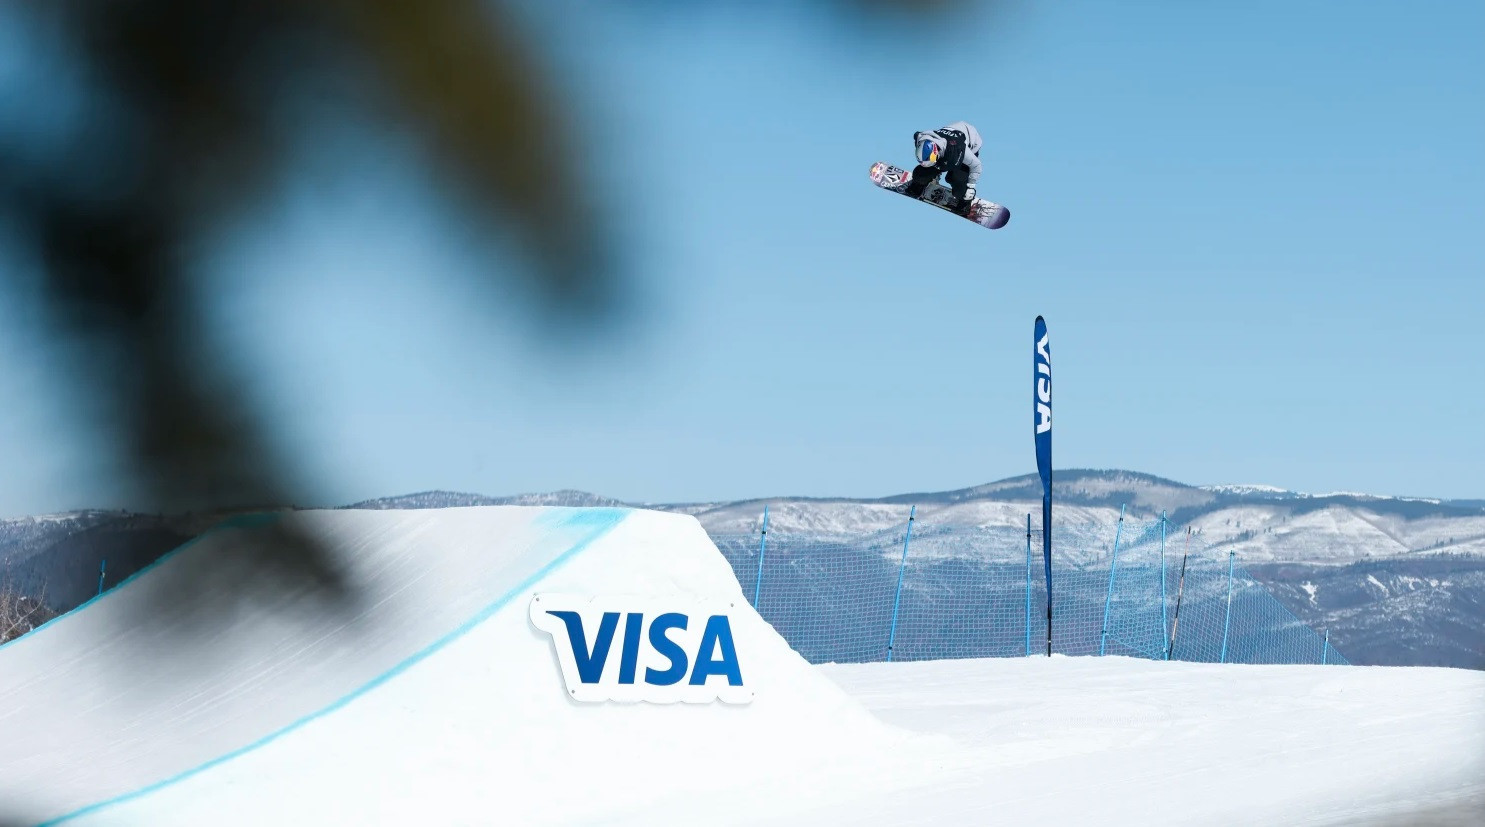 The Steamboat Ski Resort is set to stage the next leg of the FIS Big Air World Cup following a positive snow report ©US Ski and Snowboard